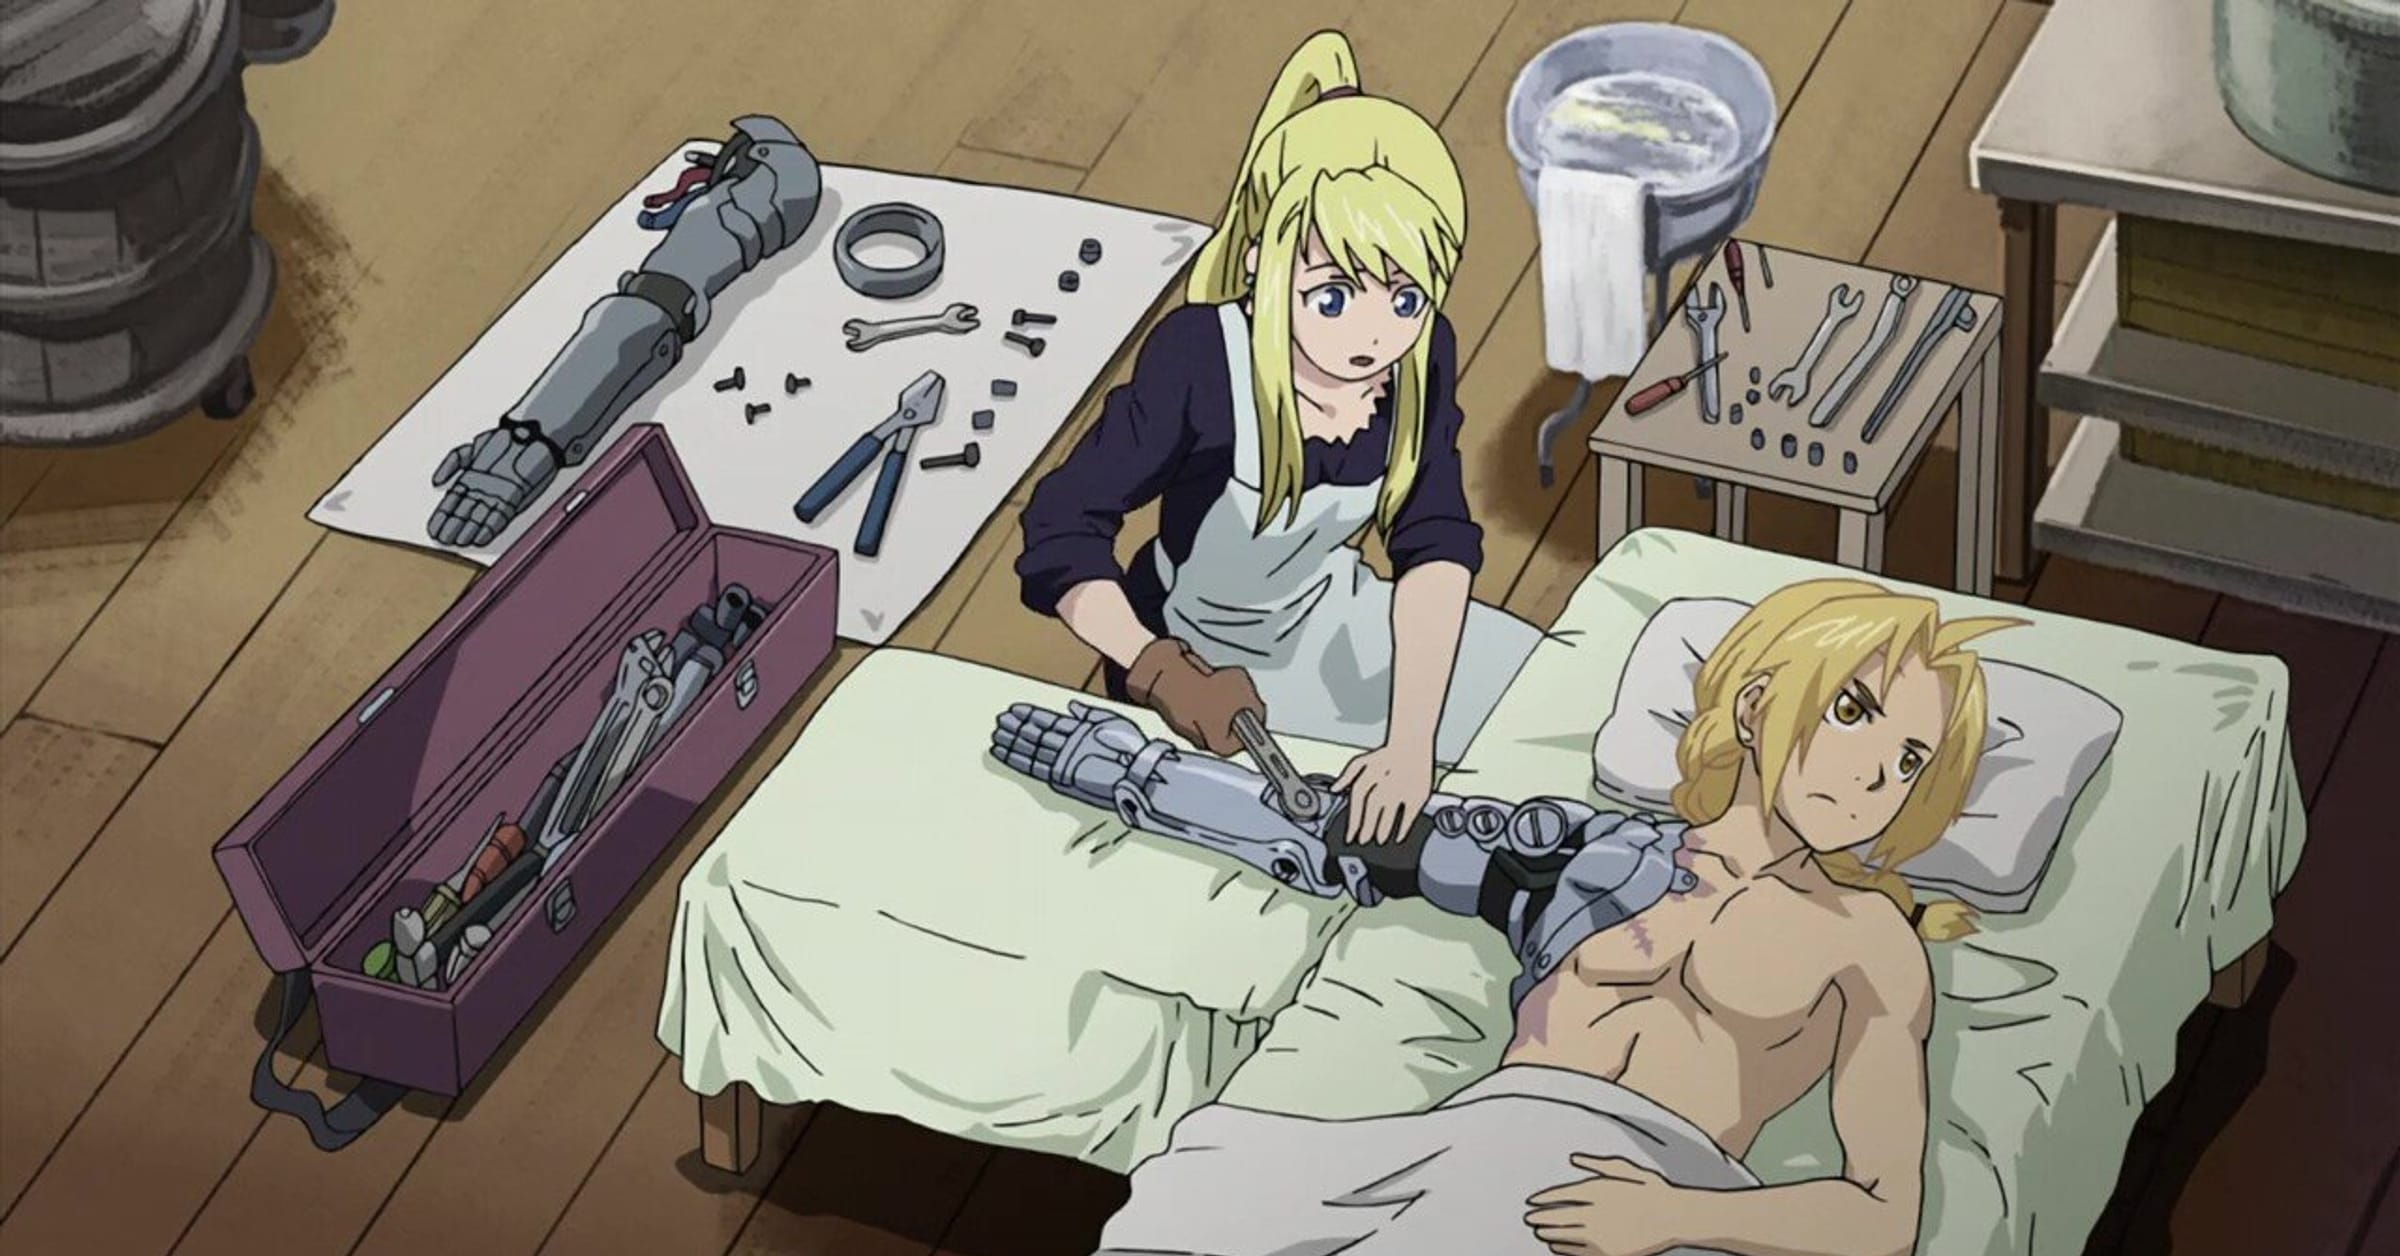 Fullmetal Alchemist: 10 Characters Who Suffered For No Reason